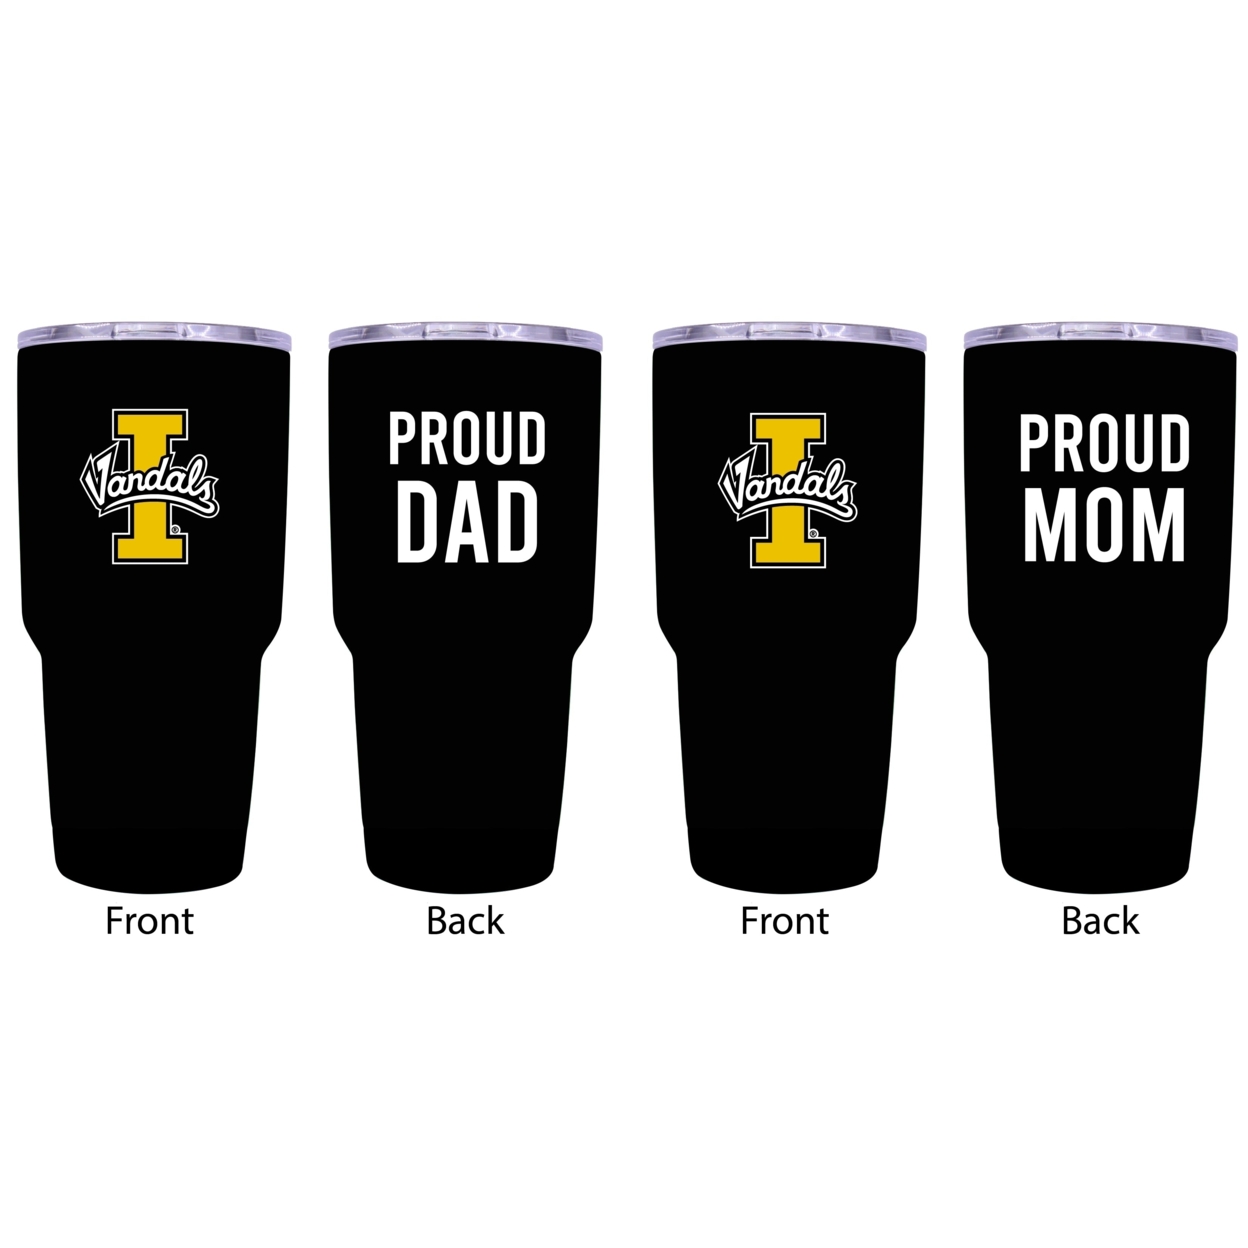 Idaho Vandals Proud Mom And Dad 24 Oz Insulated Stainless Steel Tumblers 2 Pack Black.